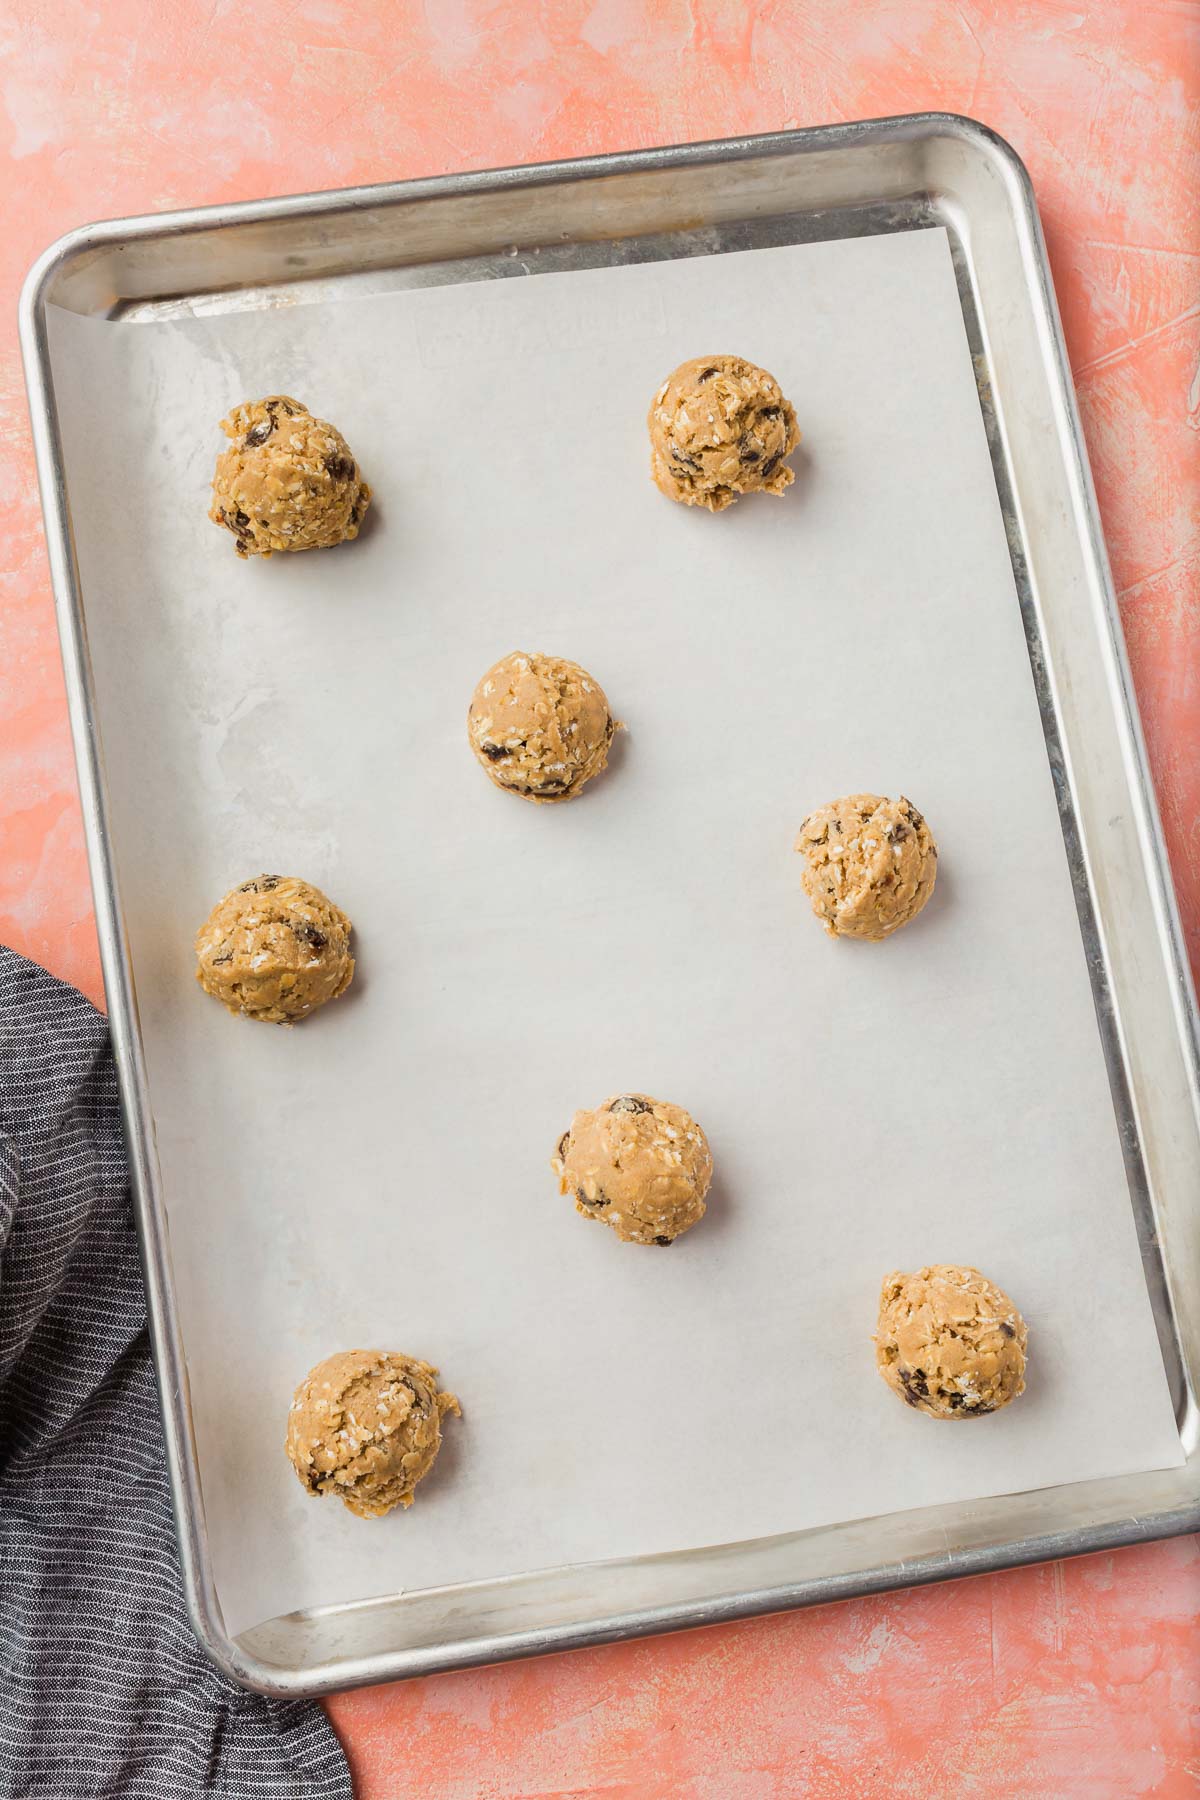 Gluten-free oatmeal raisin cookie dough balls spaced out on a parchment lined baking sheet before going in the oven.